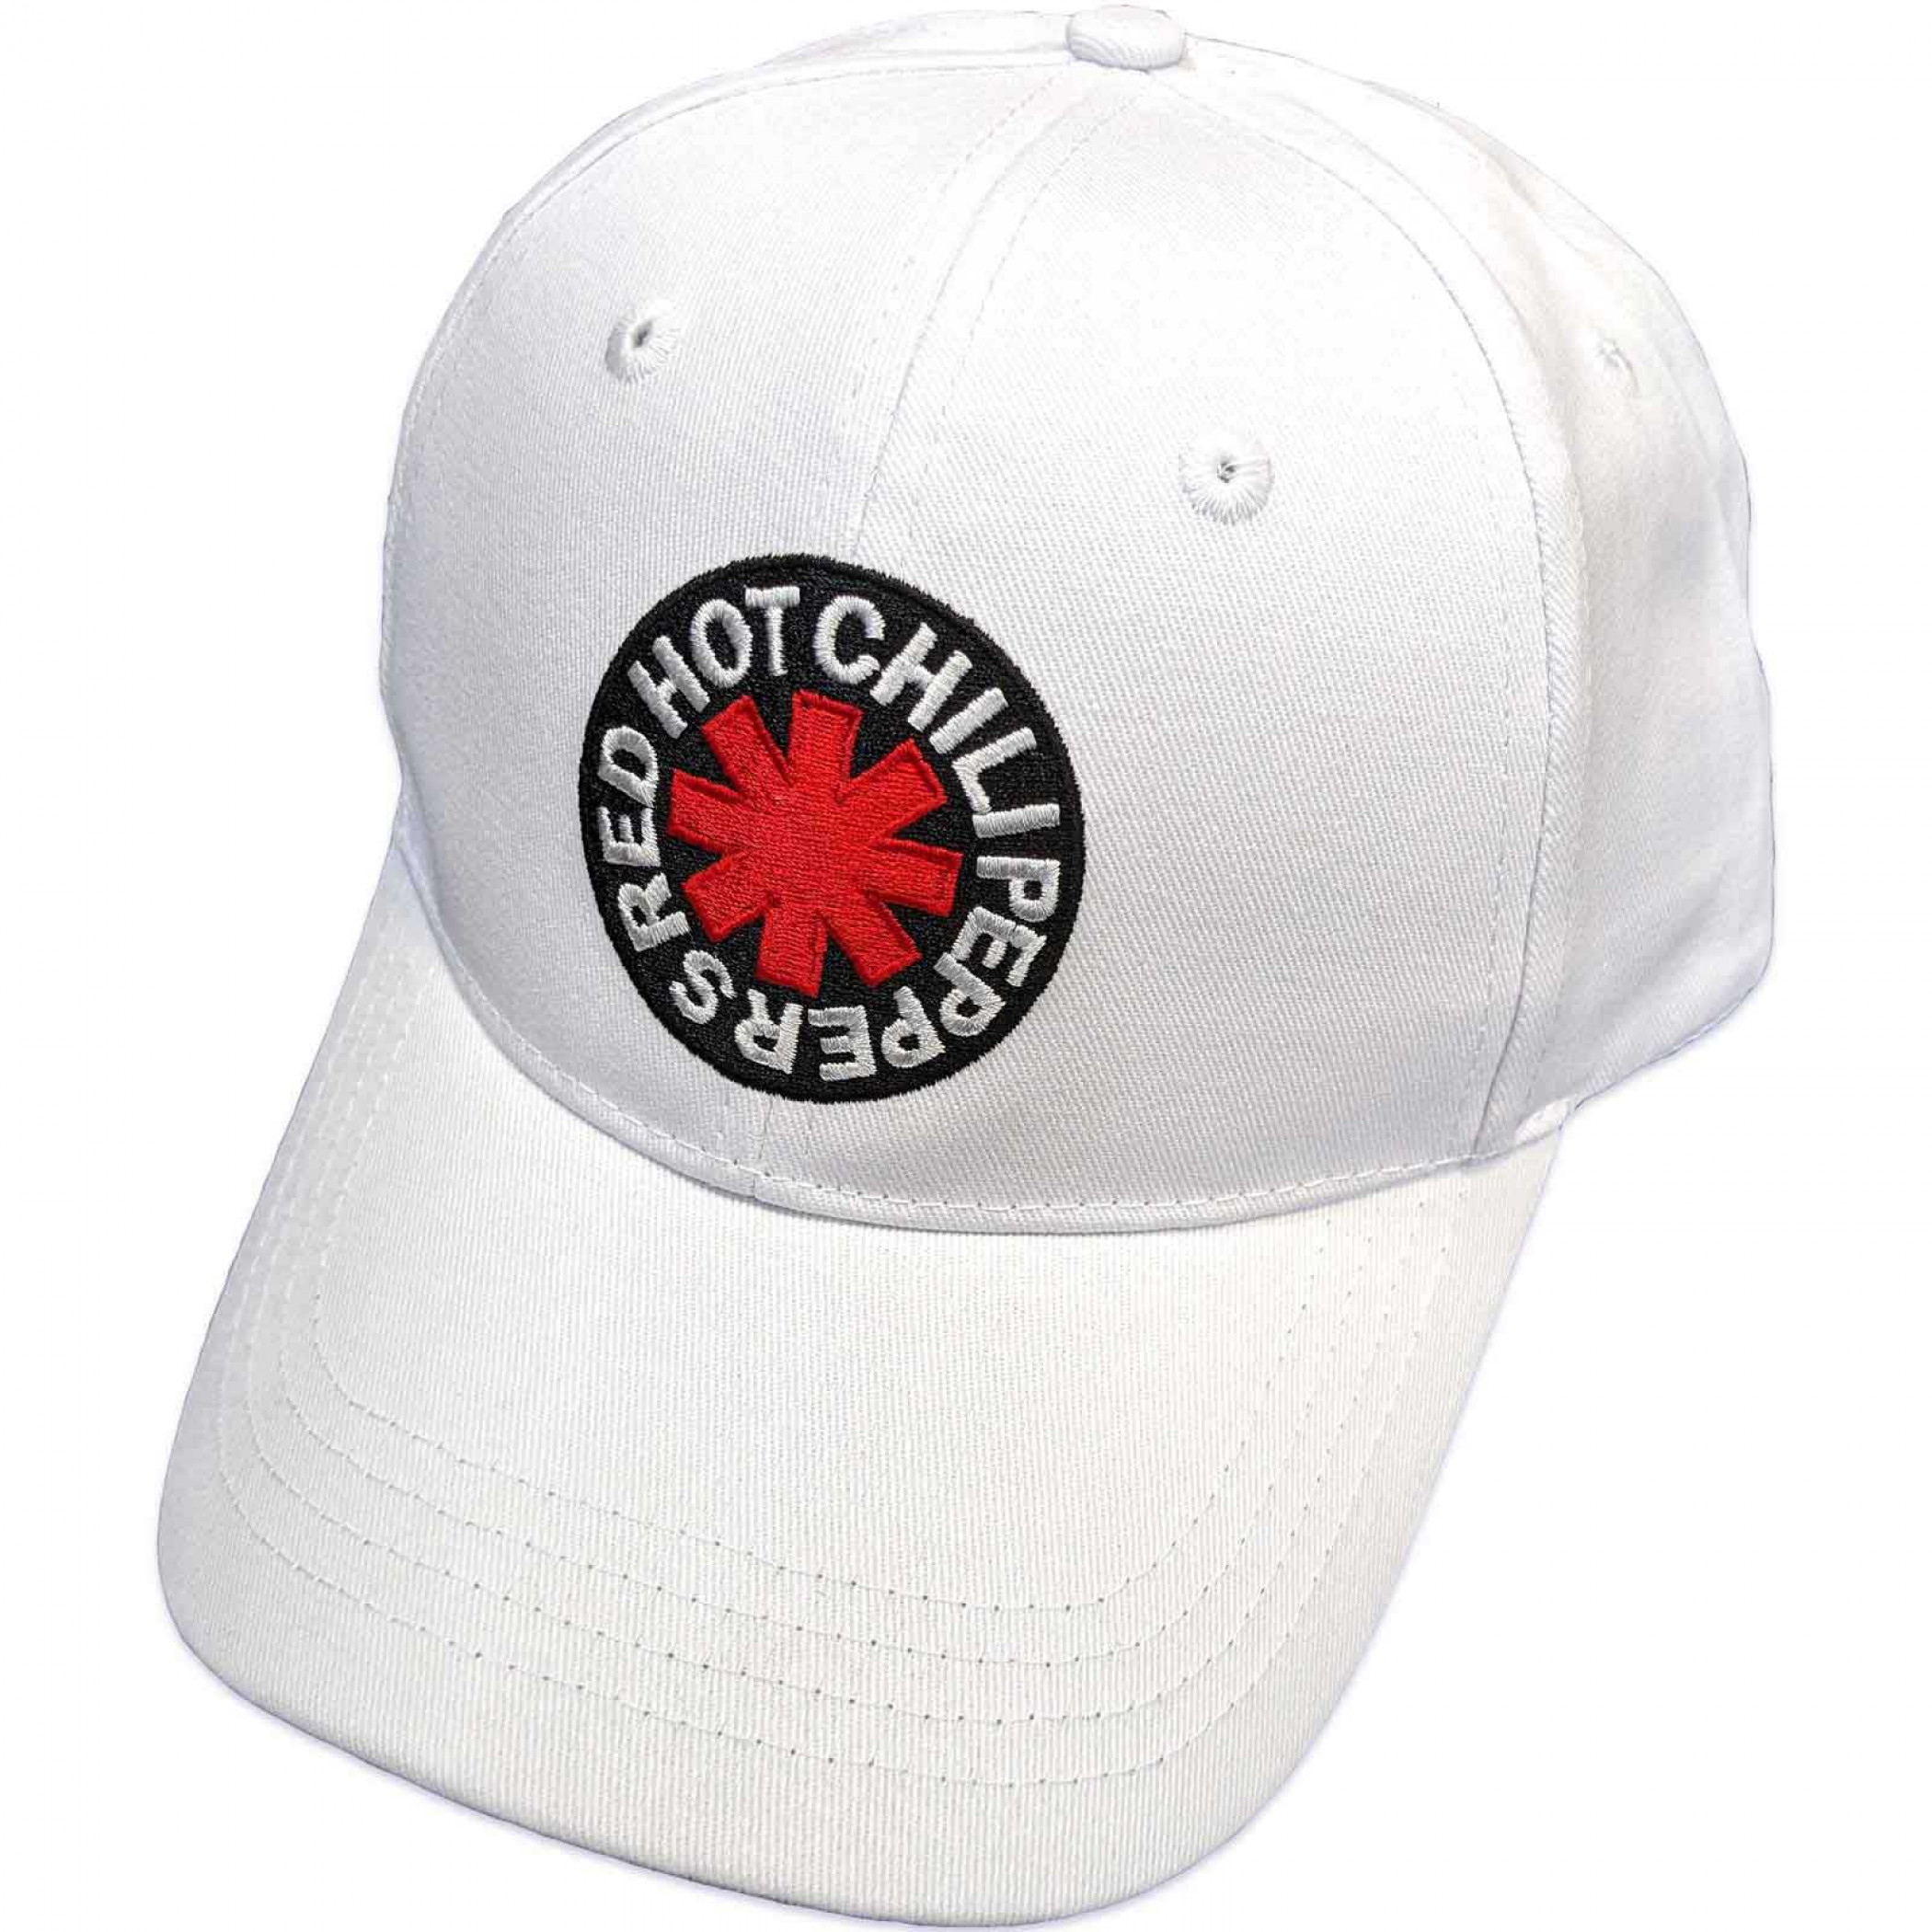 Red Hot Chili Peppers Embroidered Logo White Colorway Adjustable Snapback Hat